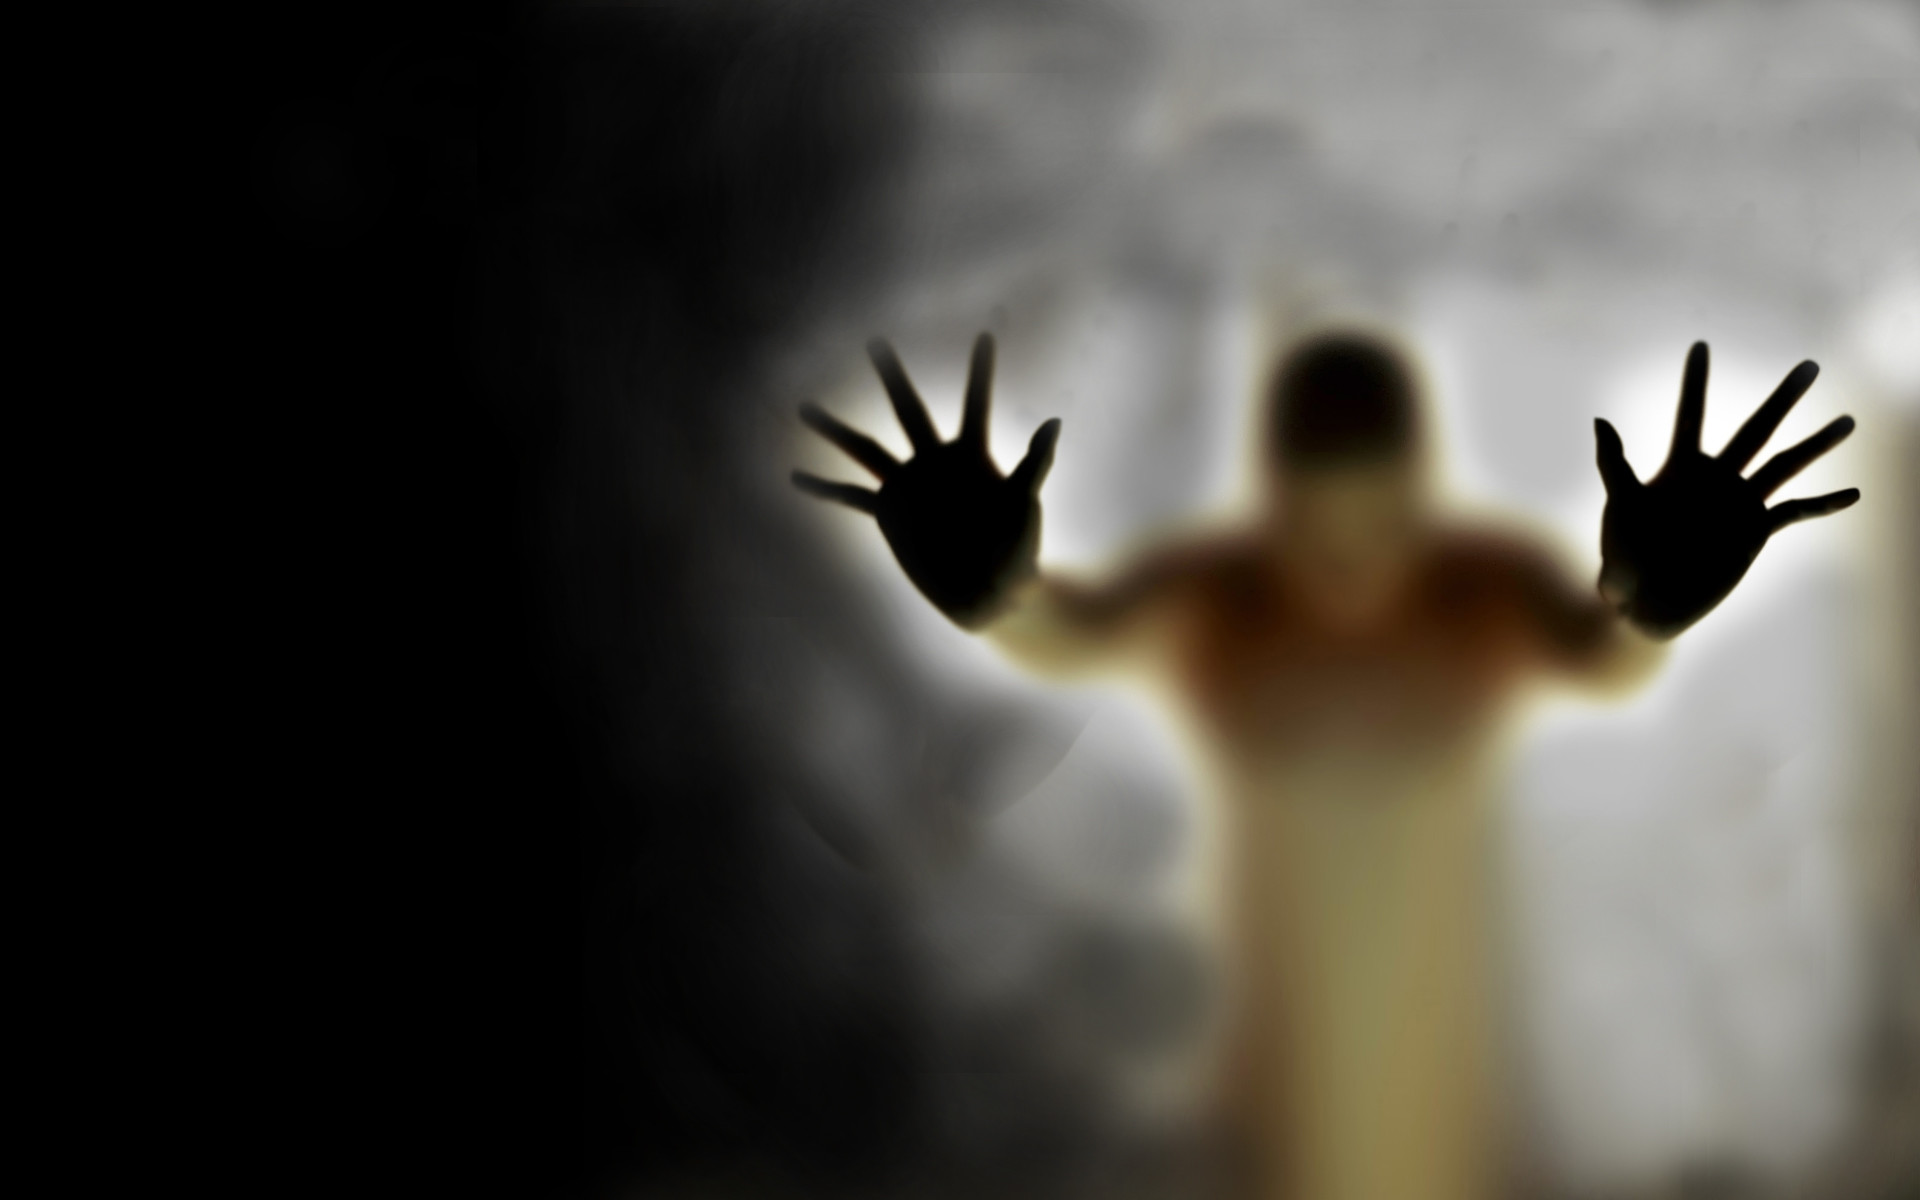 1920x1200 Scary Backgrounds for Photoshop hd wallpaper, background desktop .